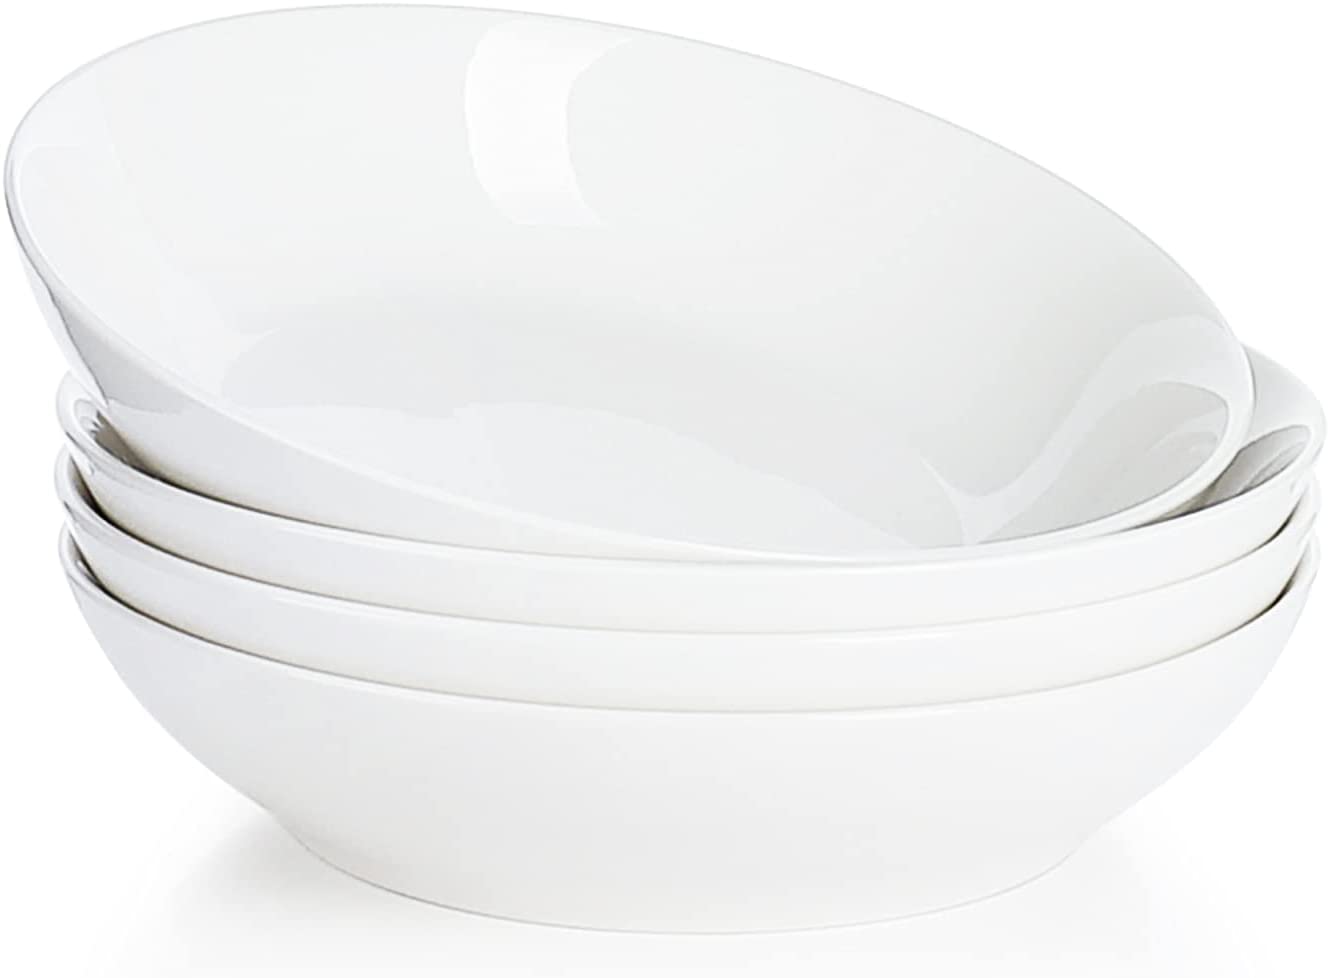 4 PC 45 Ounce Sweese Porcelain Bowls (Various Colors )- $19.19 + Free Shipping w/ Prime or orders $25+